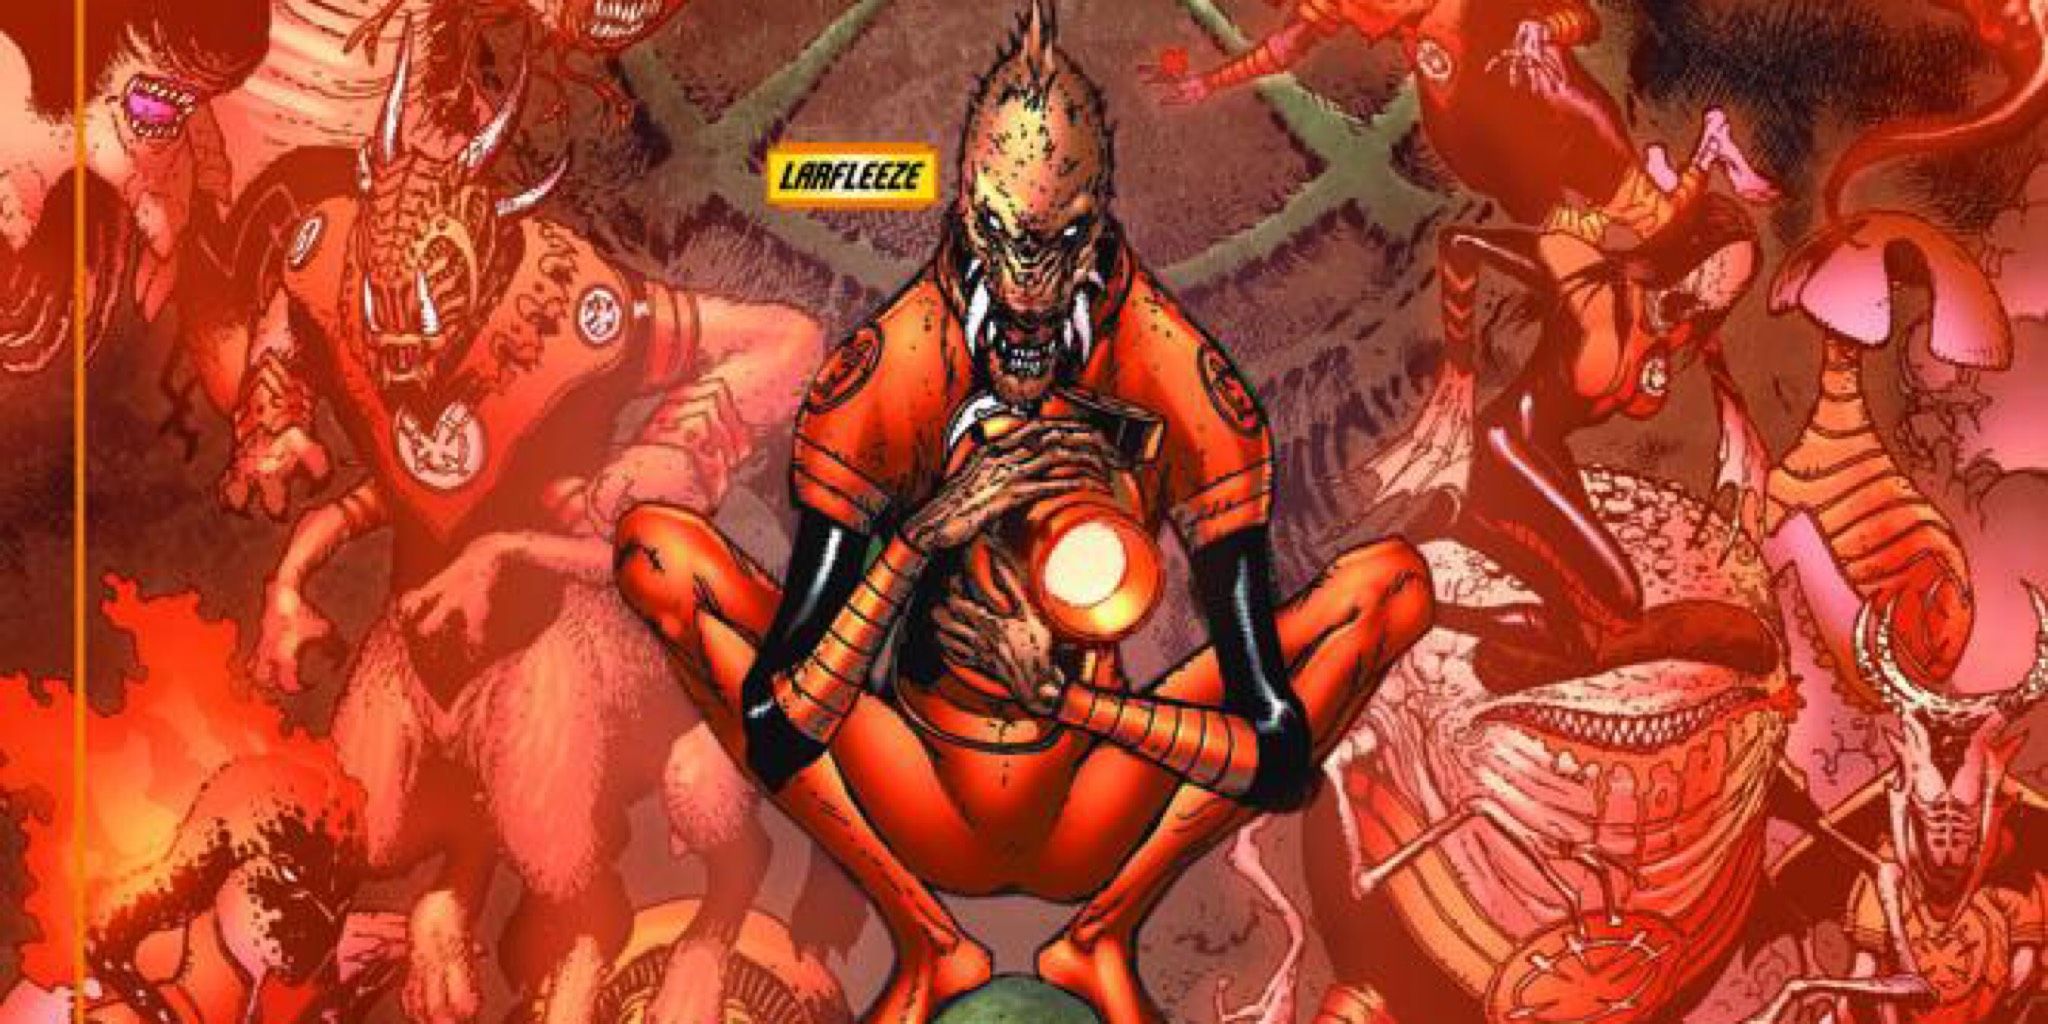 A closeup of Larfleeze clutching an Orange Lantern battery, surrounded by the Orange Lantern Corps